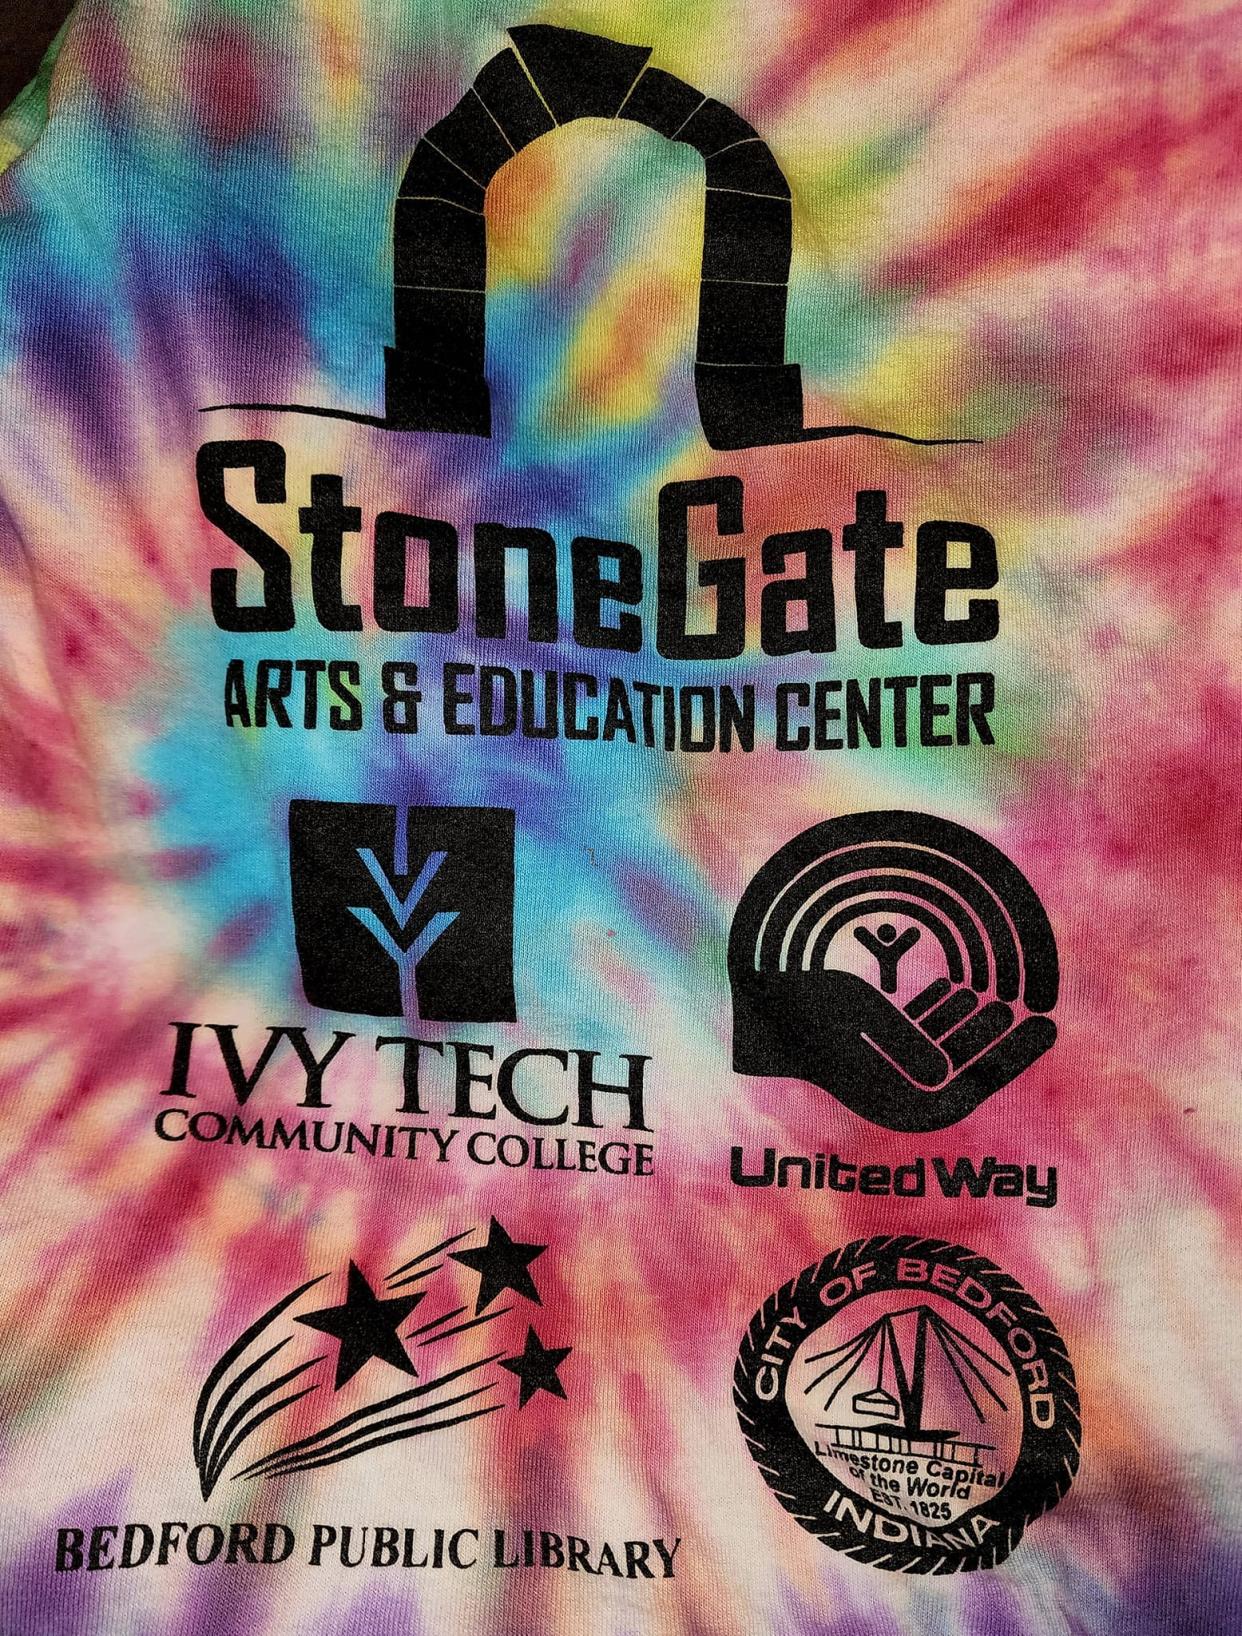 StoneGate Arts & Education Center in Bedford will have one-week arts camps for kids beginning June 12.